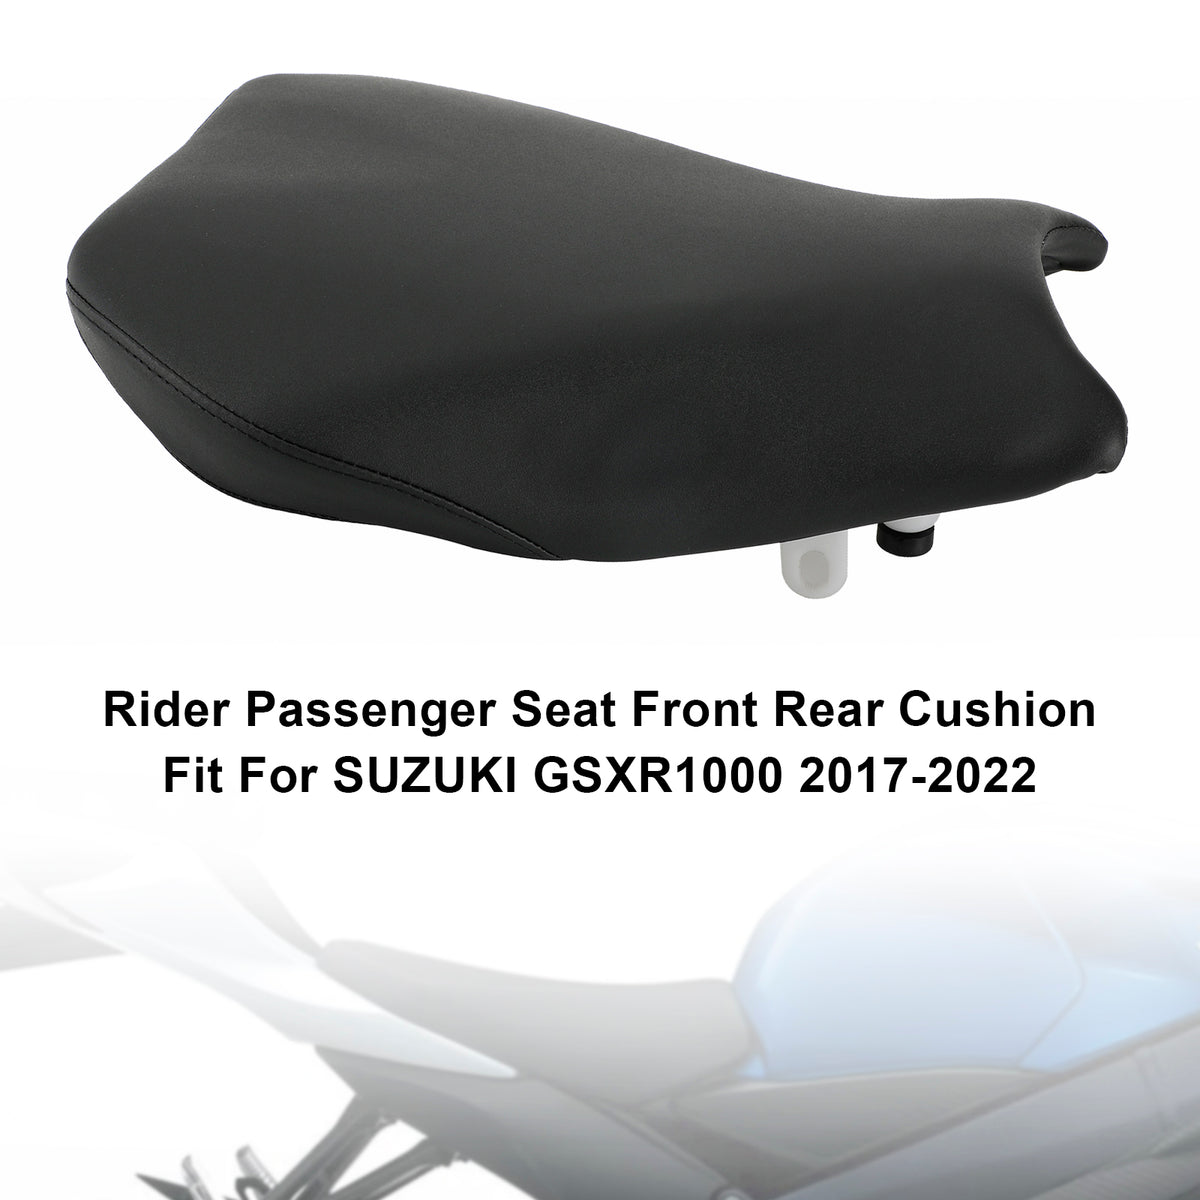 Replace Front Rear Driver Passenger Seat For Suzuki Gsxr1000 2017-2022